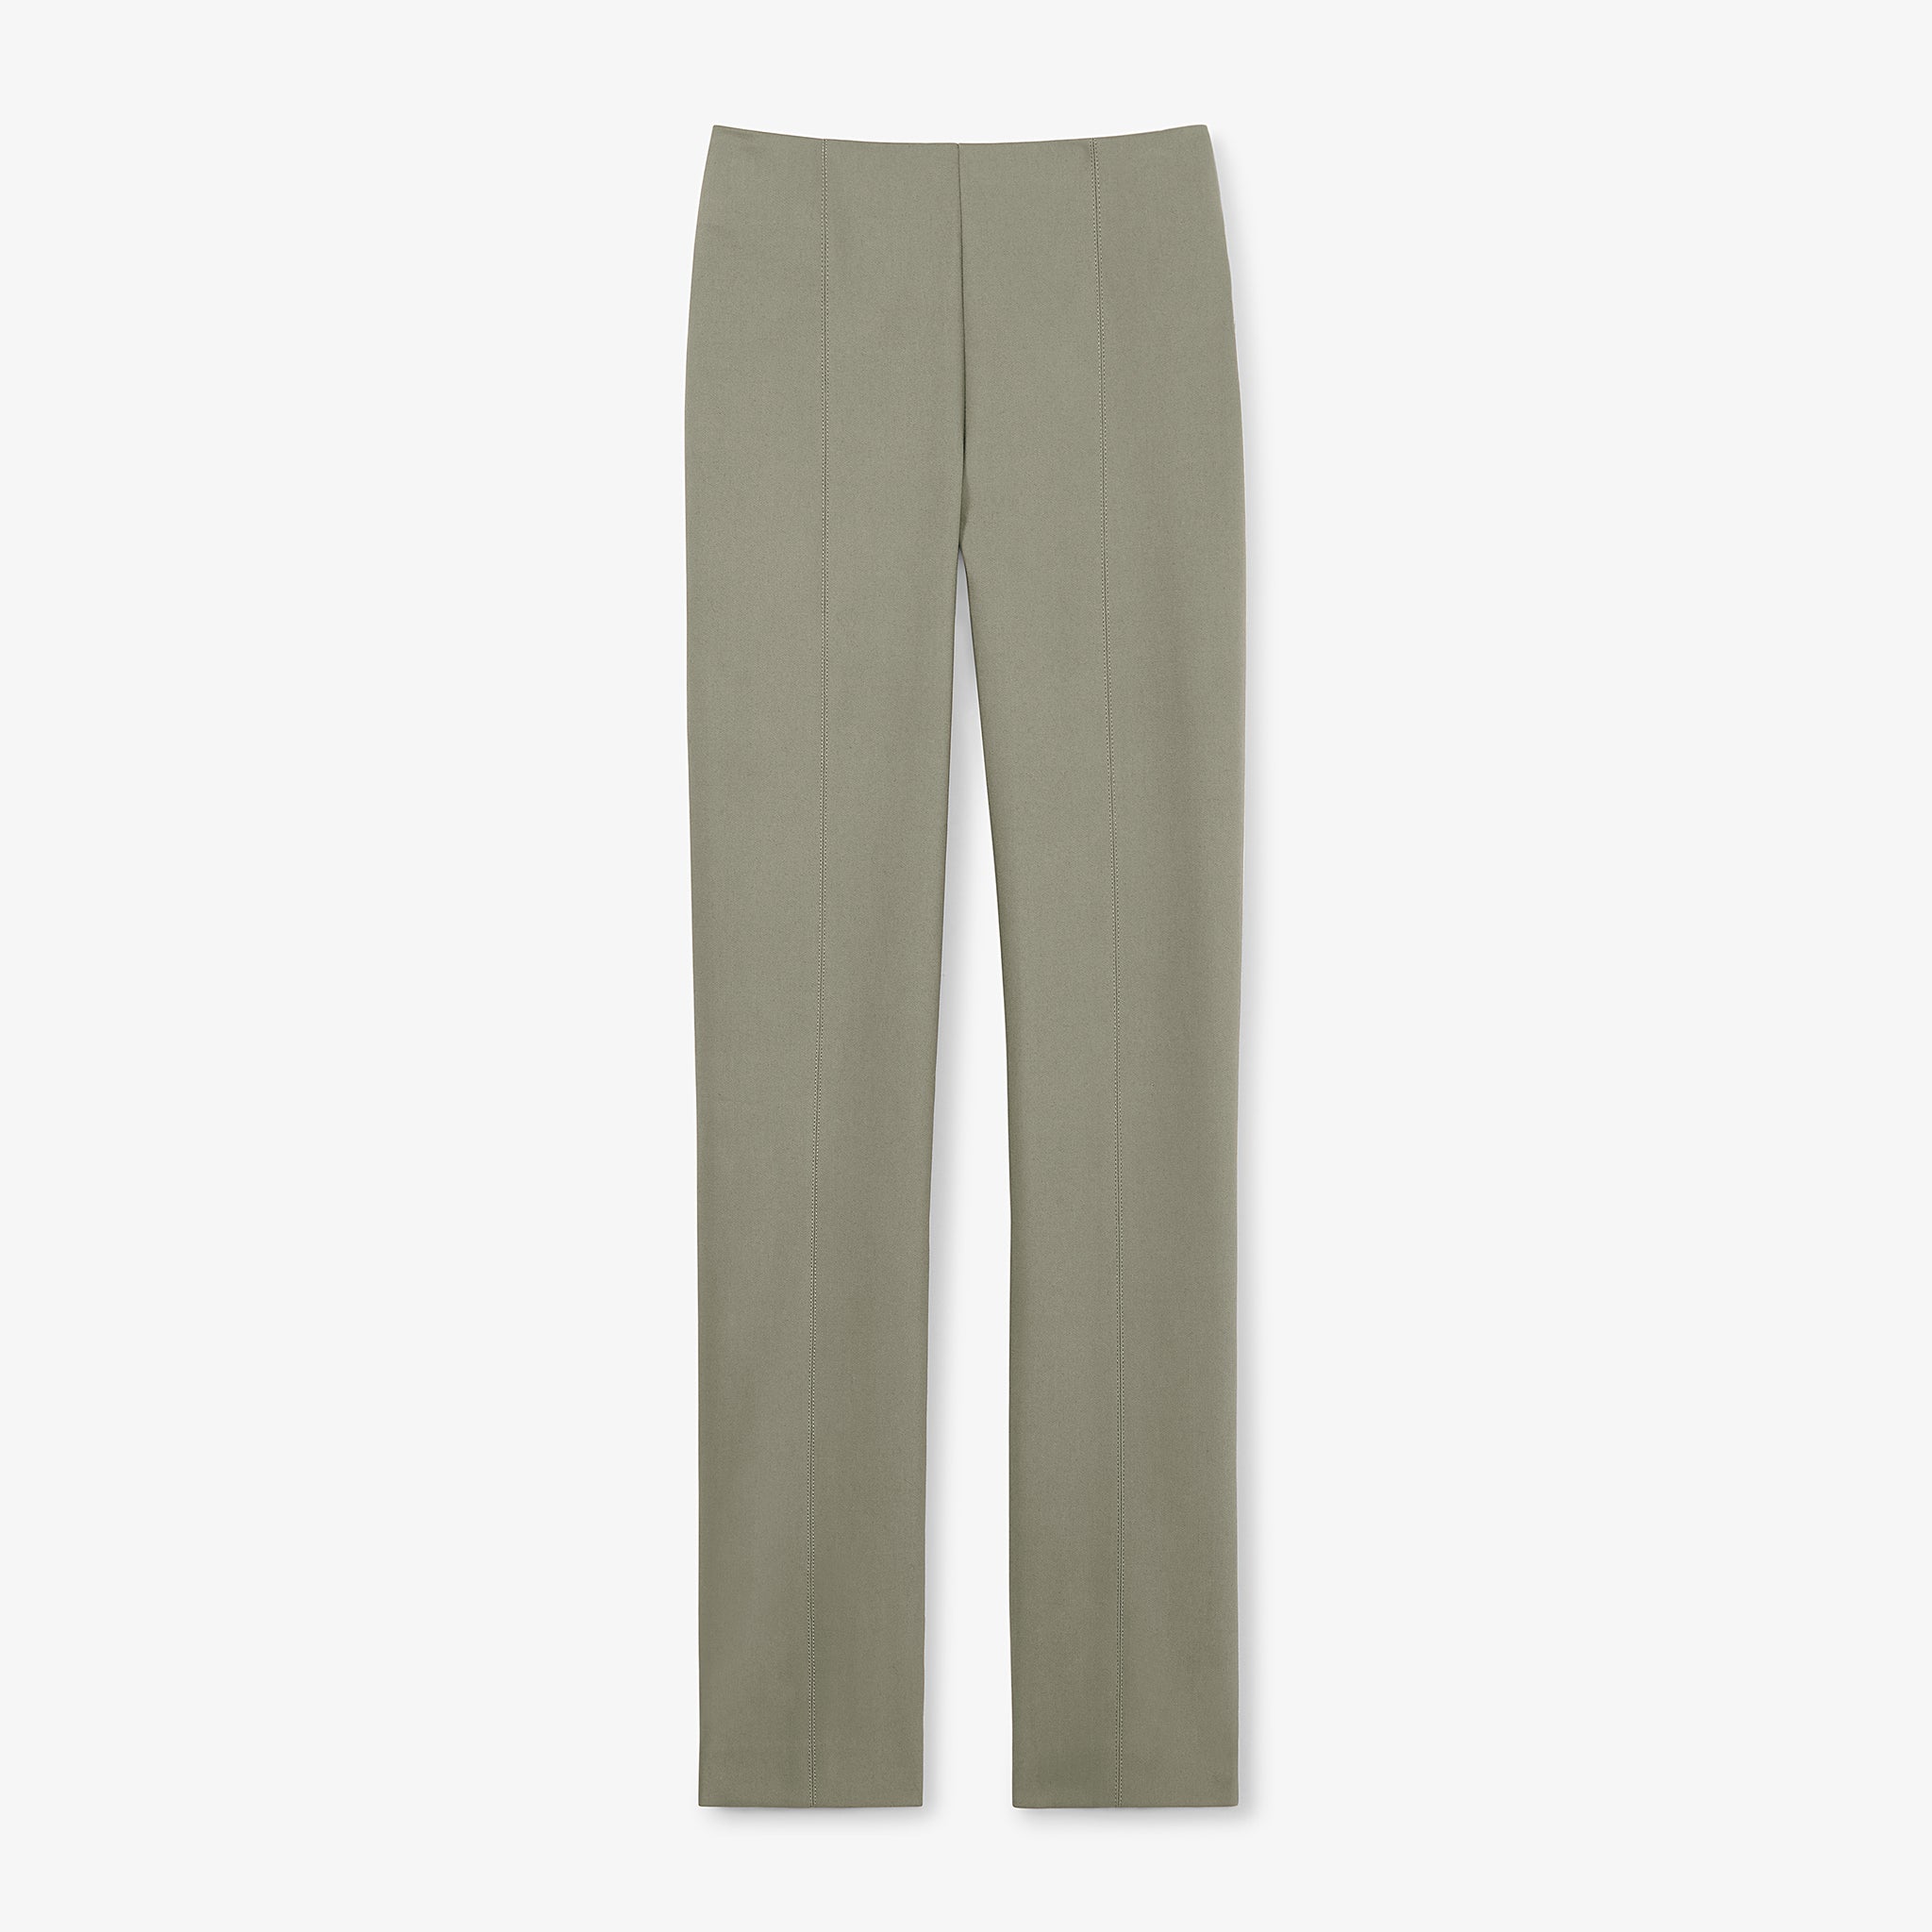 Packshot of the foster pant in thyme